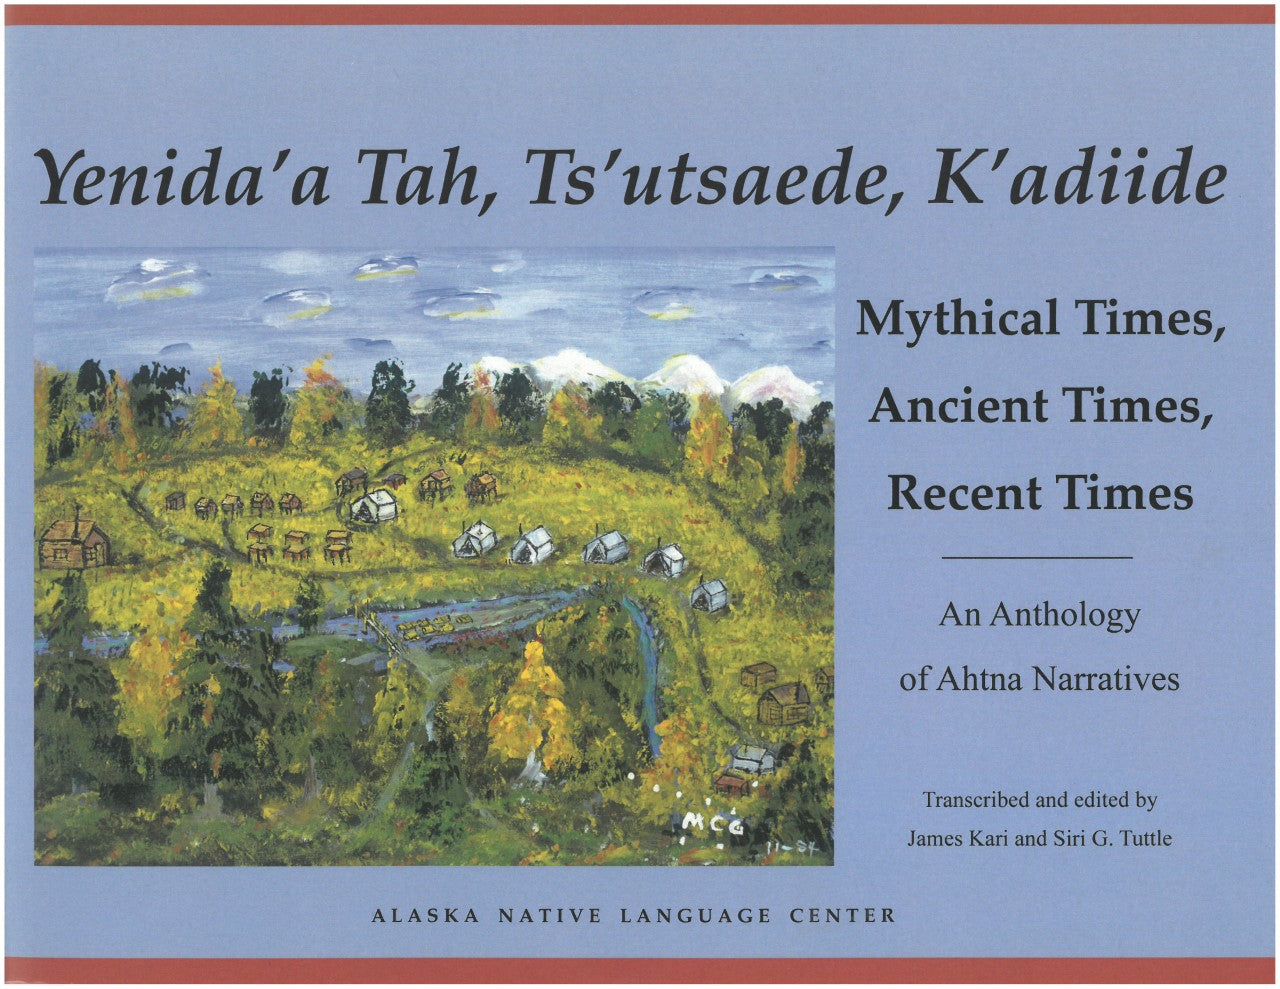 Yenida'a Tah, Tsu'utsaede, K'adiide: Mythical Times, Ancient Times, Recent Times: An Anthology of Ahtna Narratives